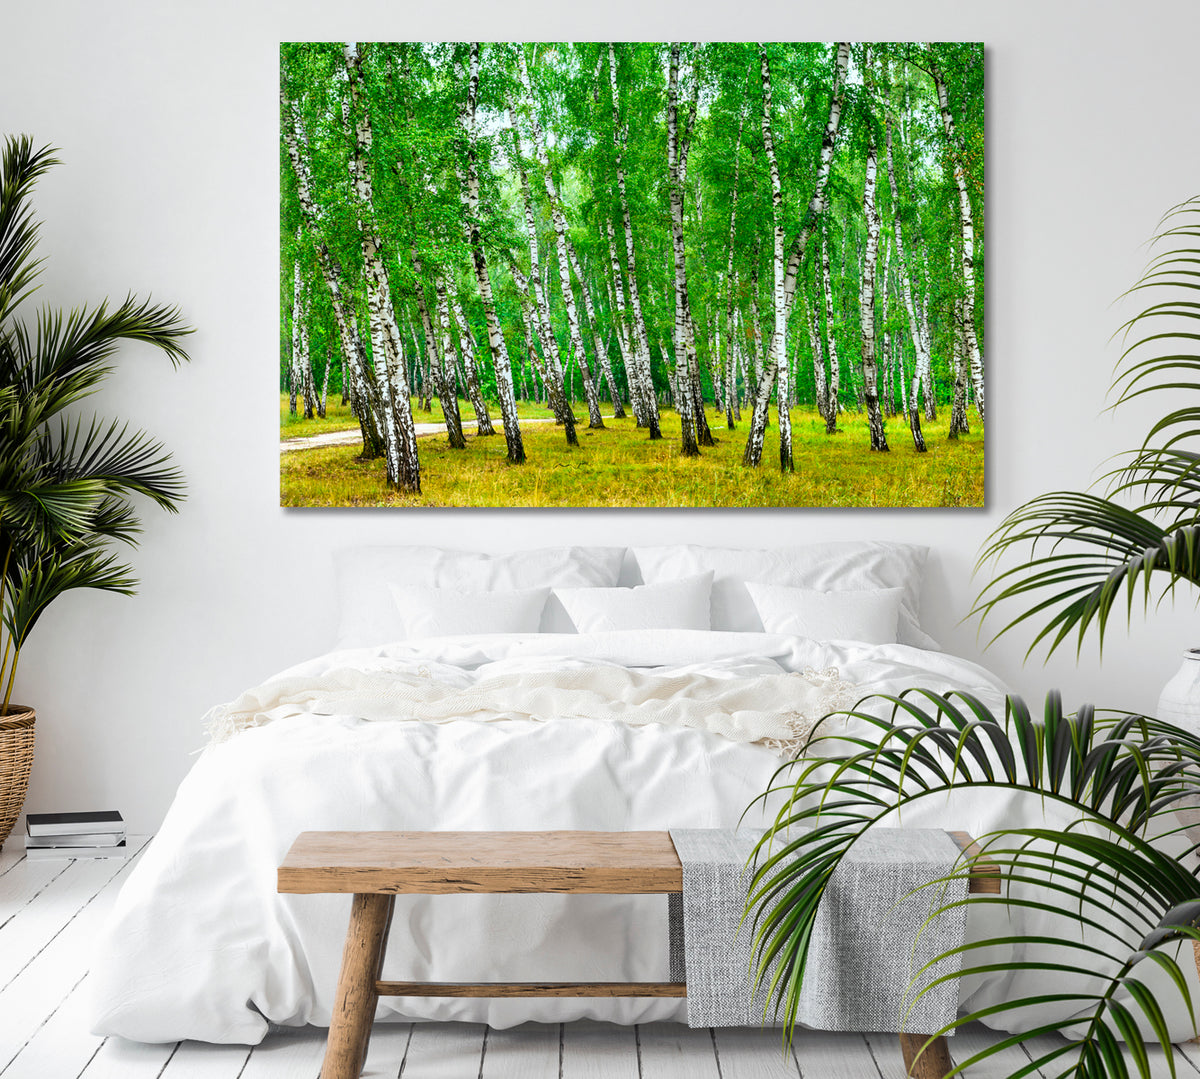 Birch Grove Sunny Summer Day Panorama Nature Wall Canvas Print Artesty 1 panel 24" x 16" 